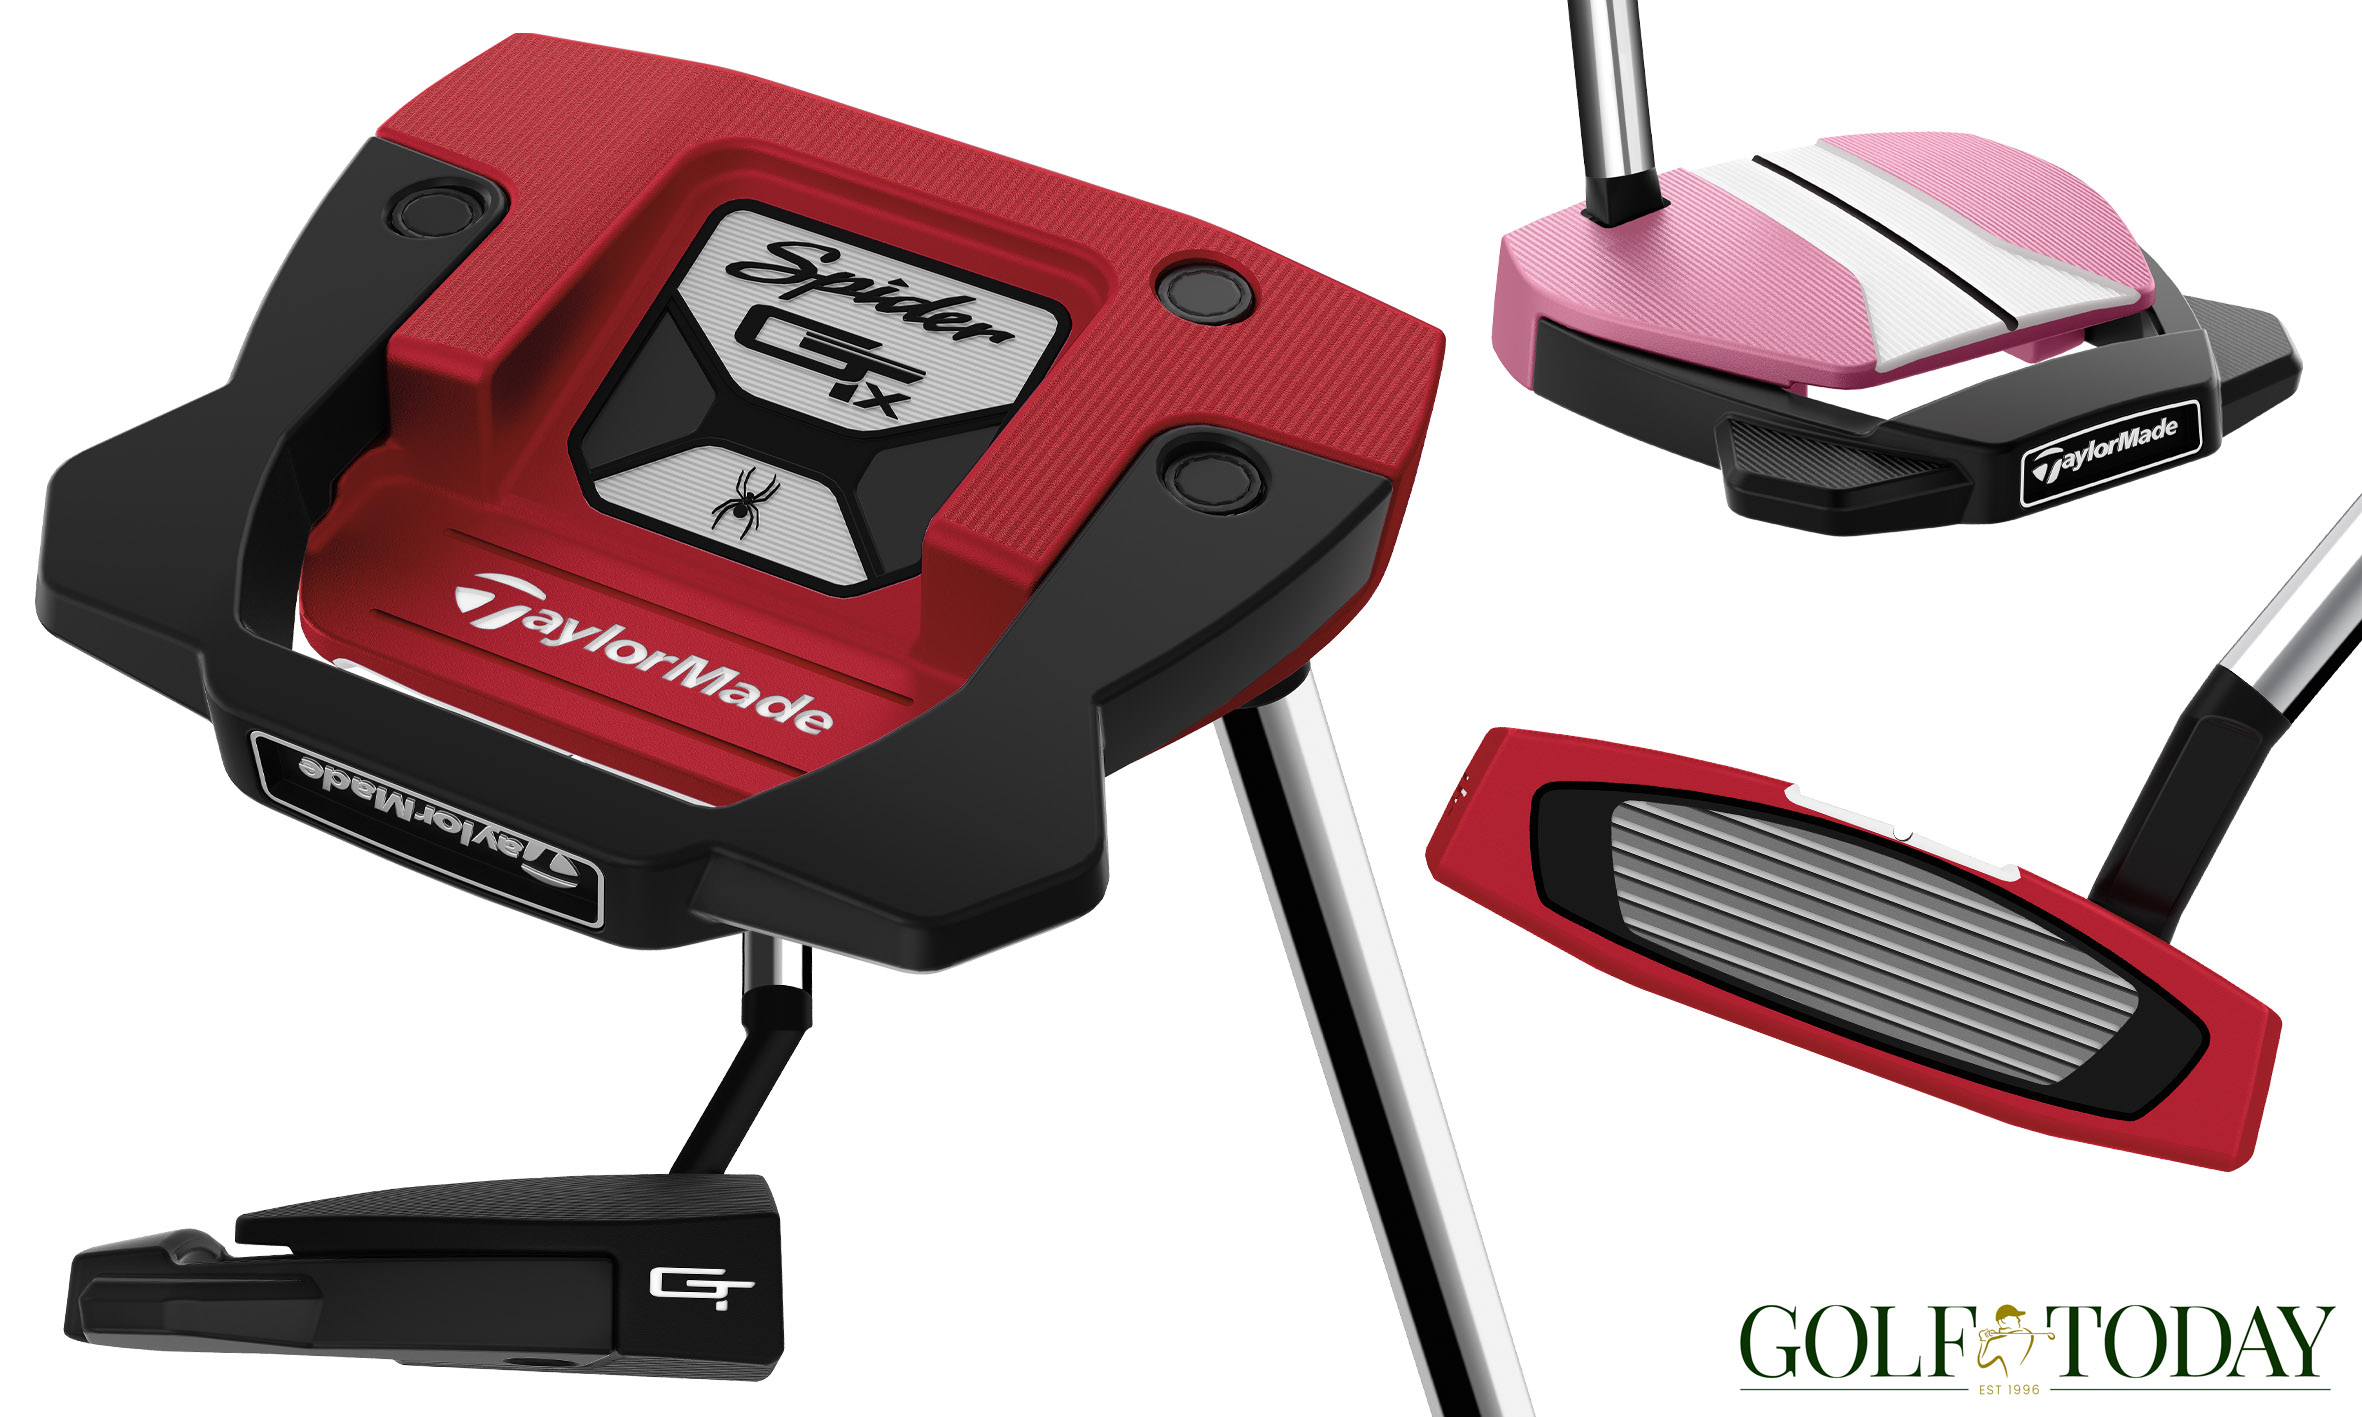 The TaylorMade Spider GTX putter